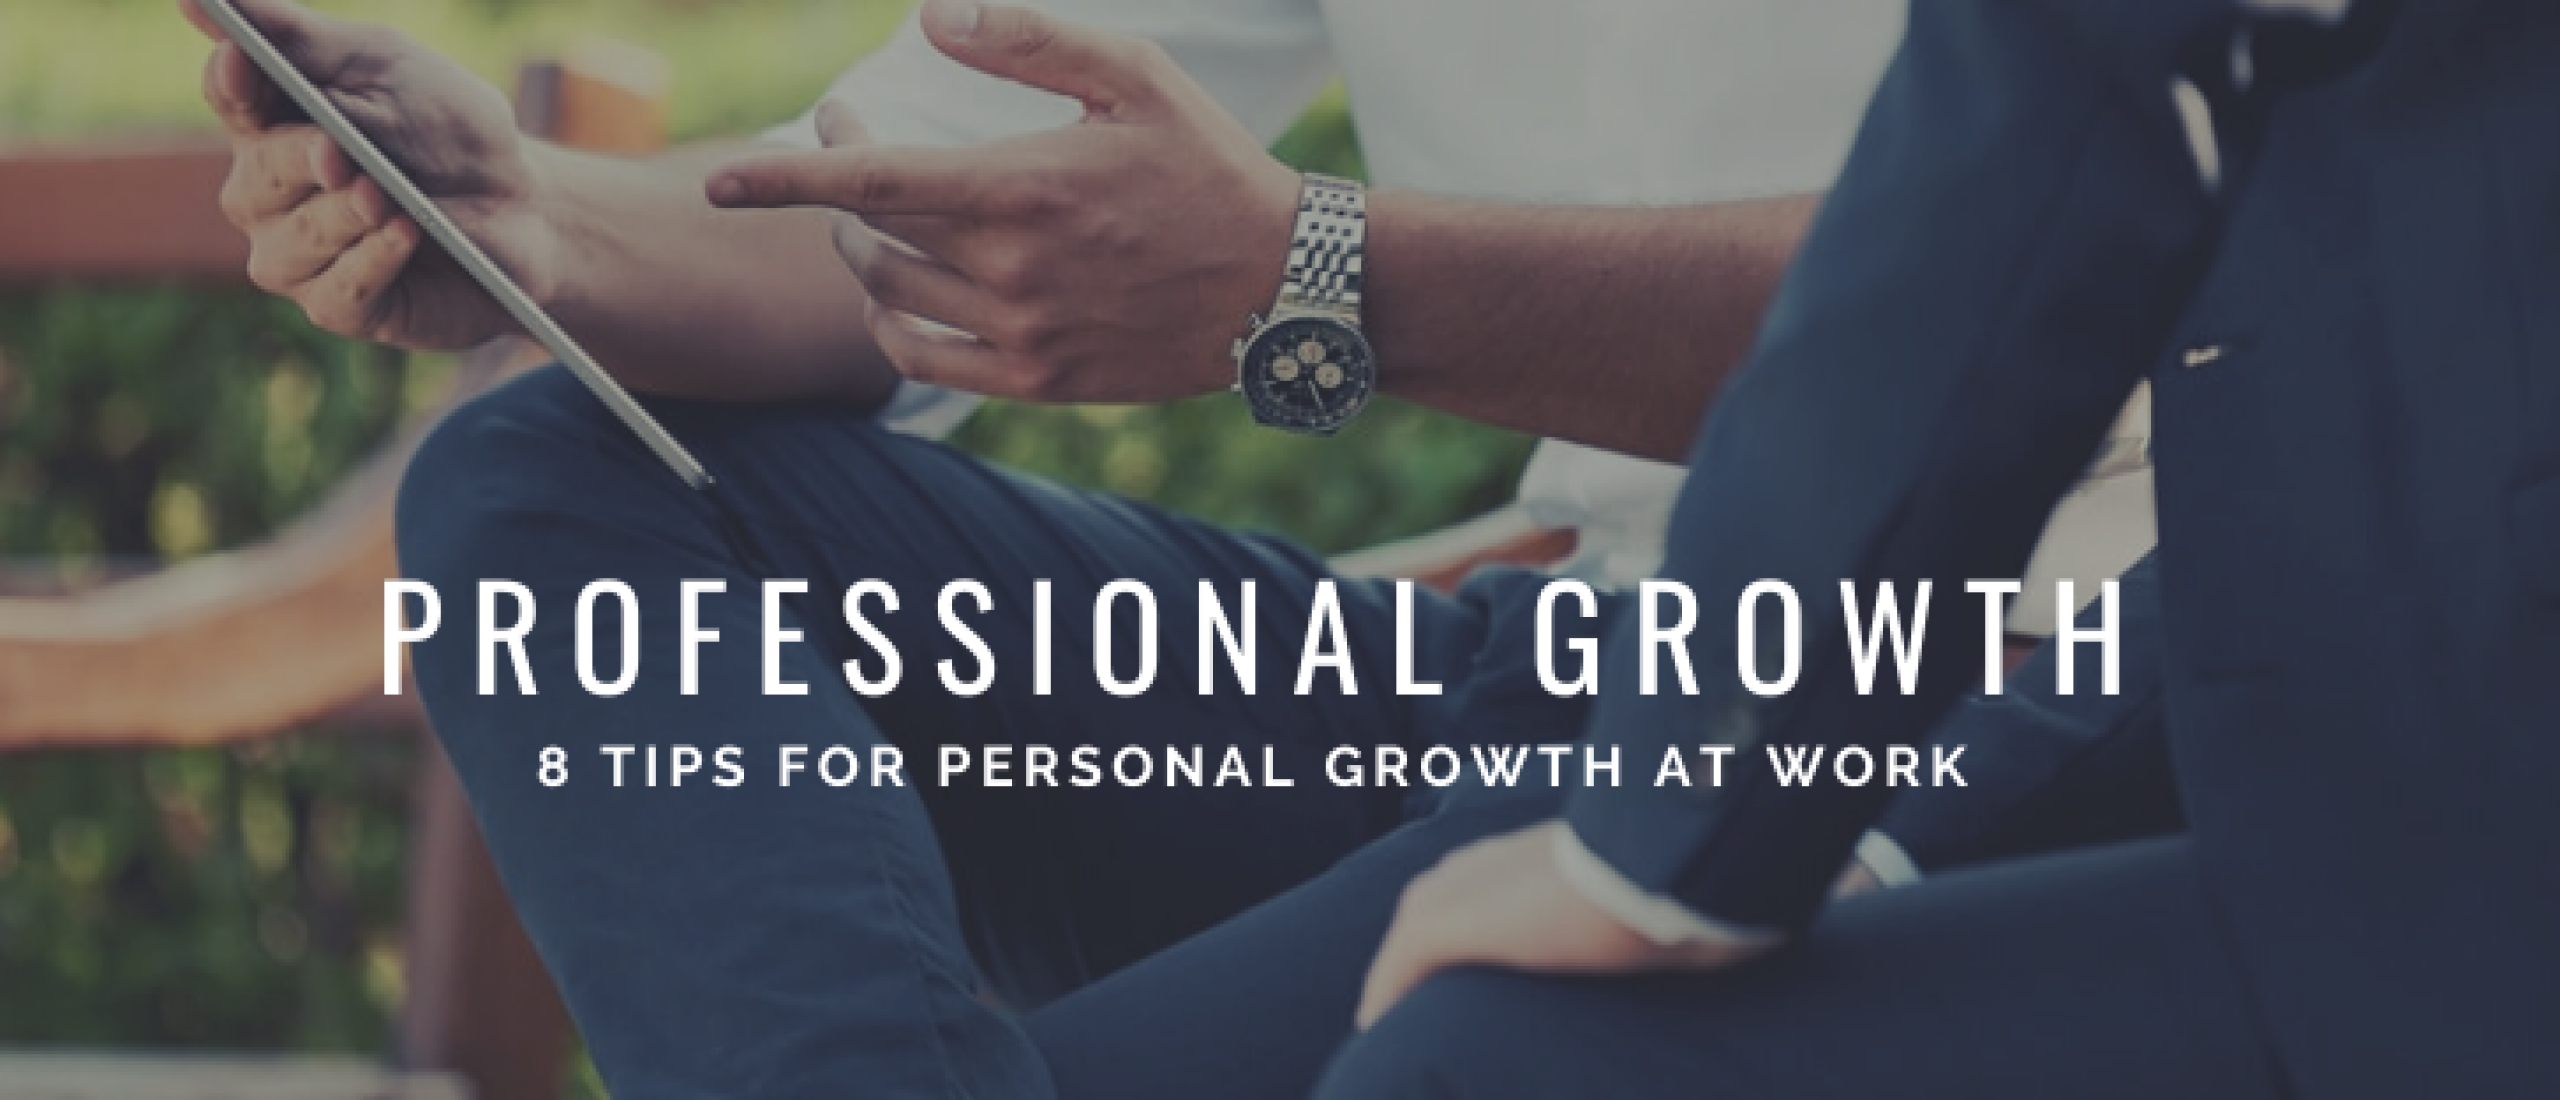 Personal Growth at Work: 8 Tips to Grow!